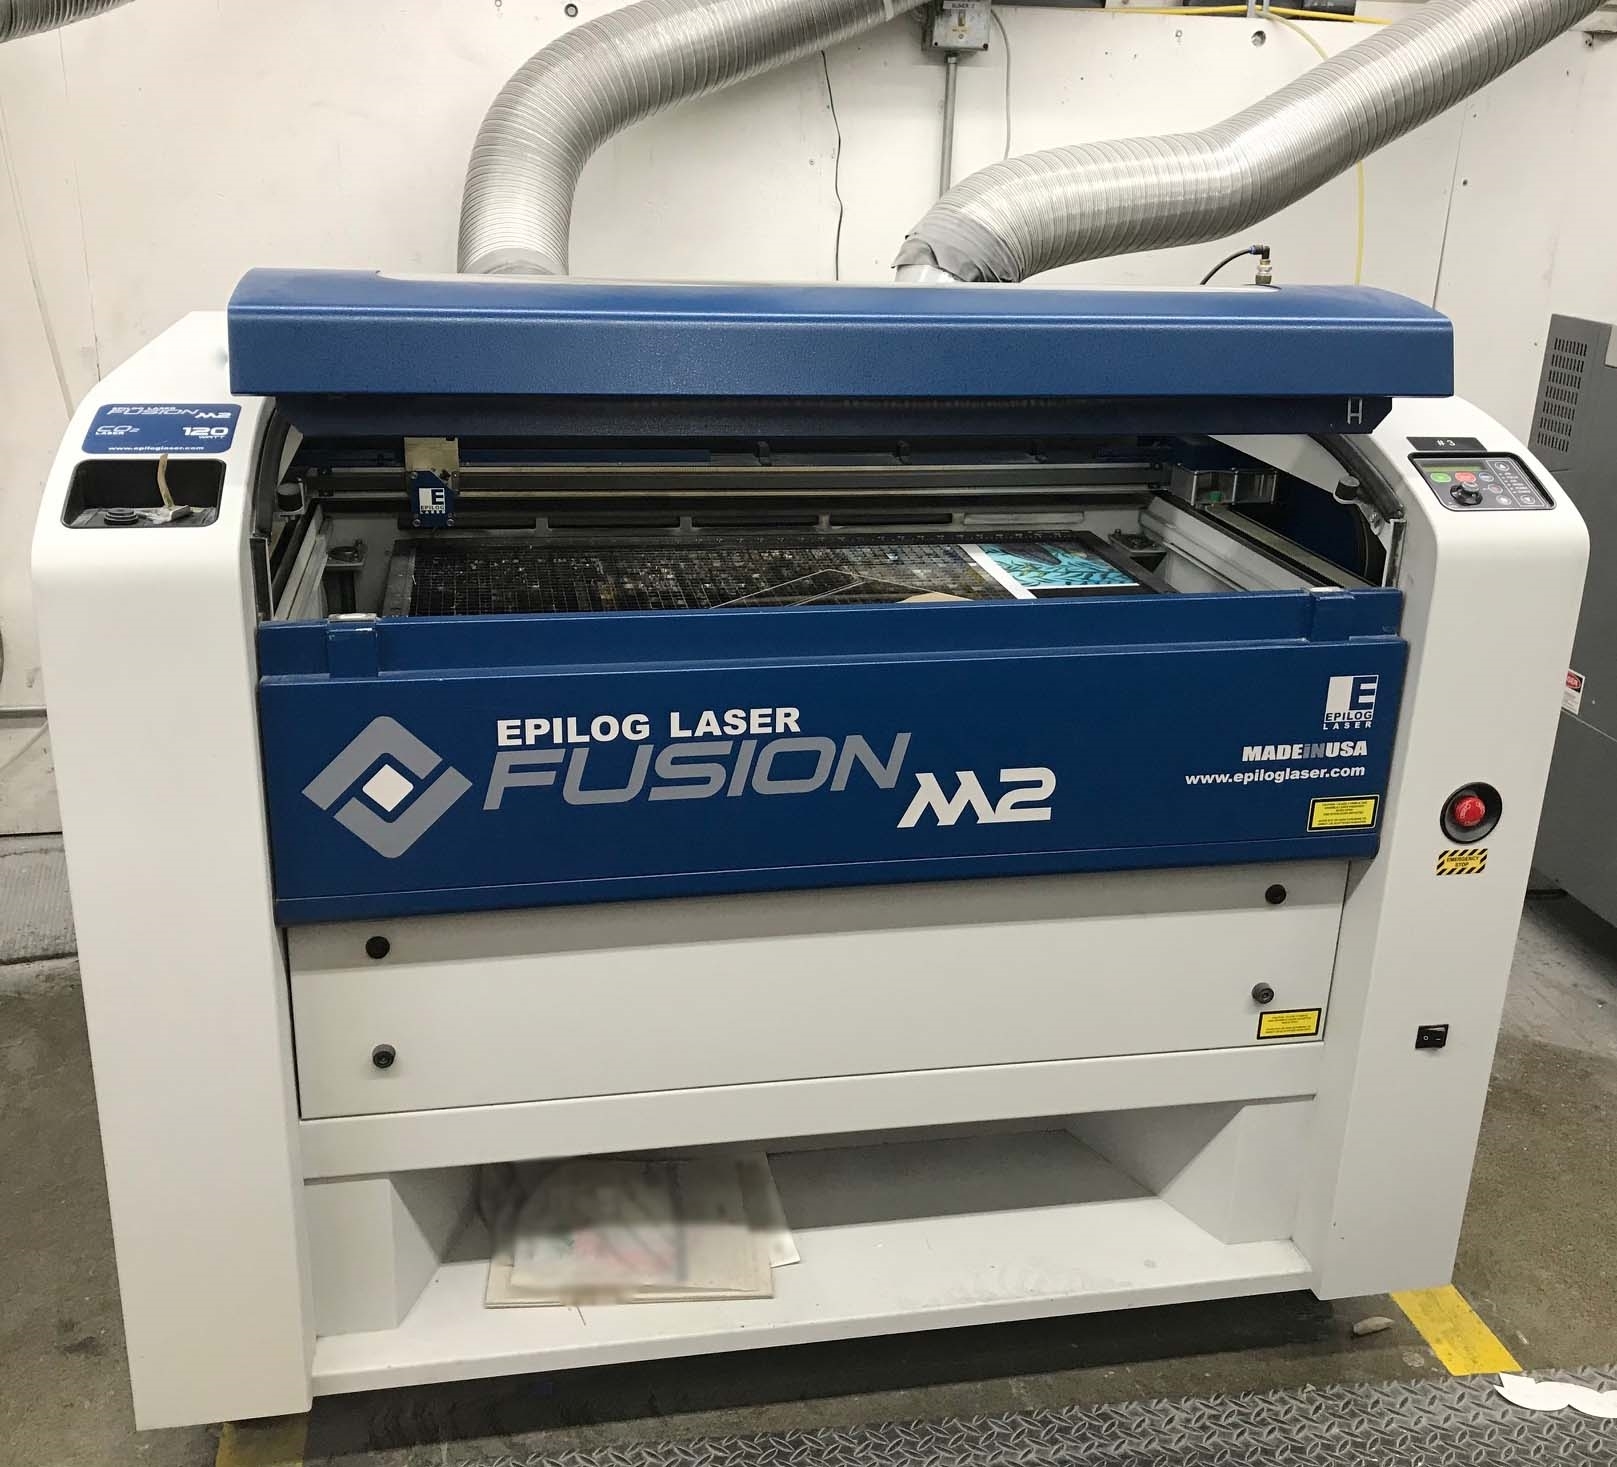 EPILOG LASER Fusion 14000 Laser used for sale price #9258947, 2017 &gt; buy from CAE